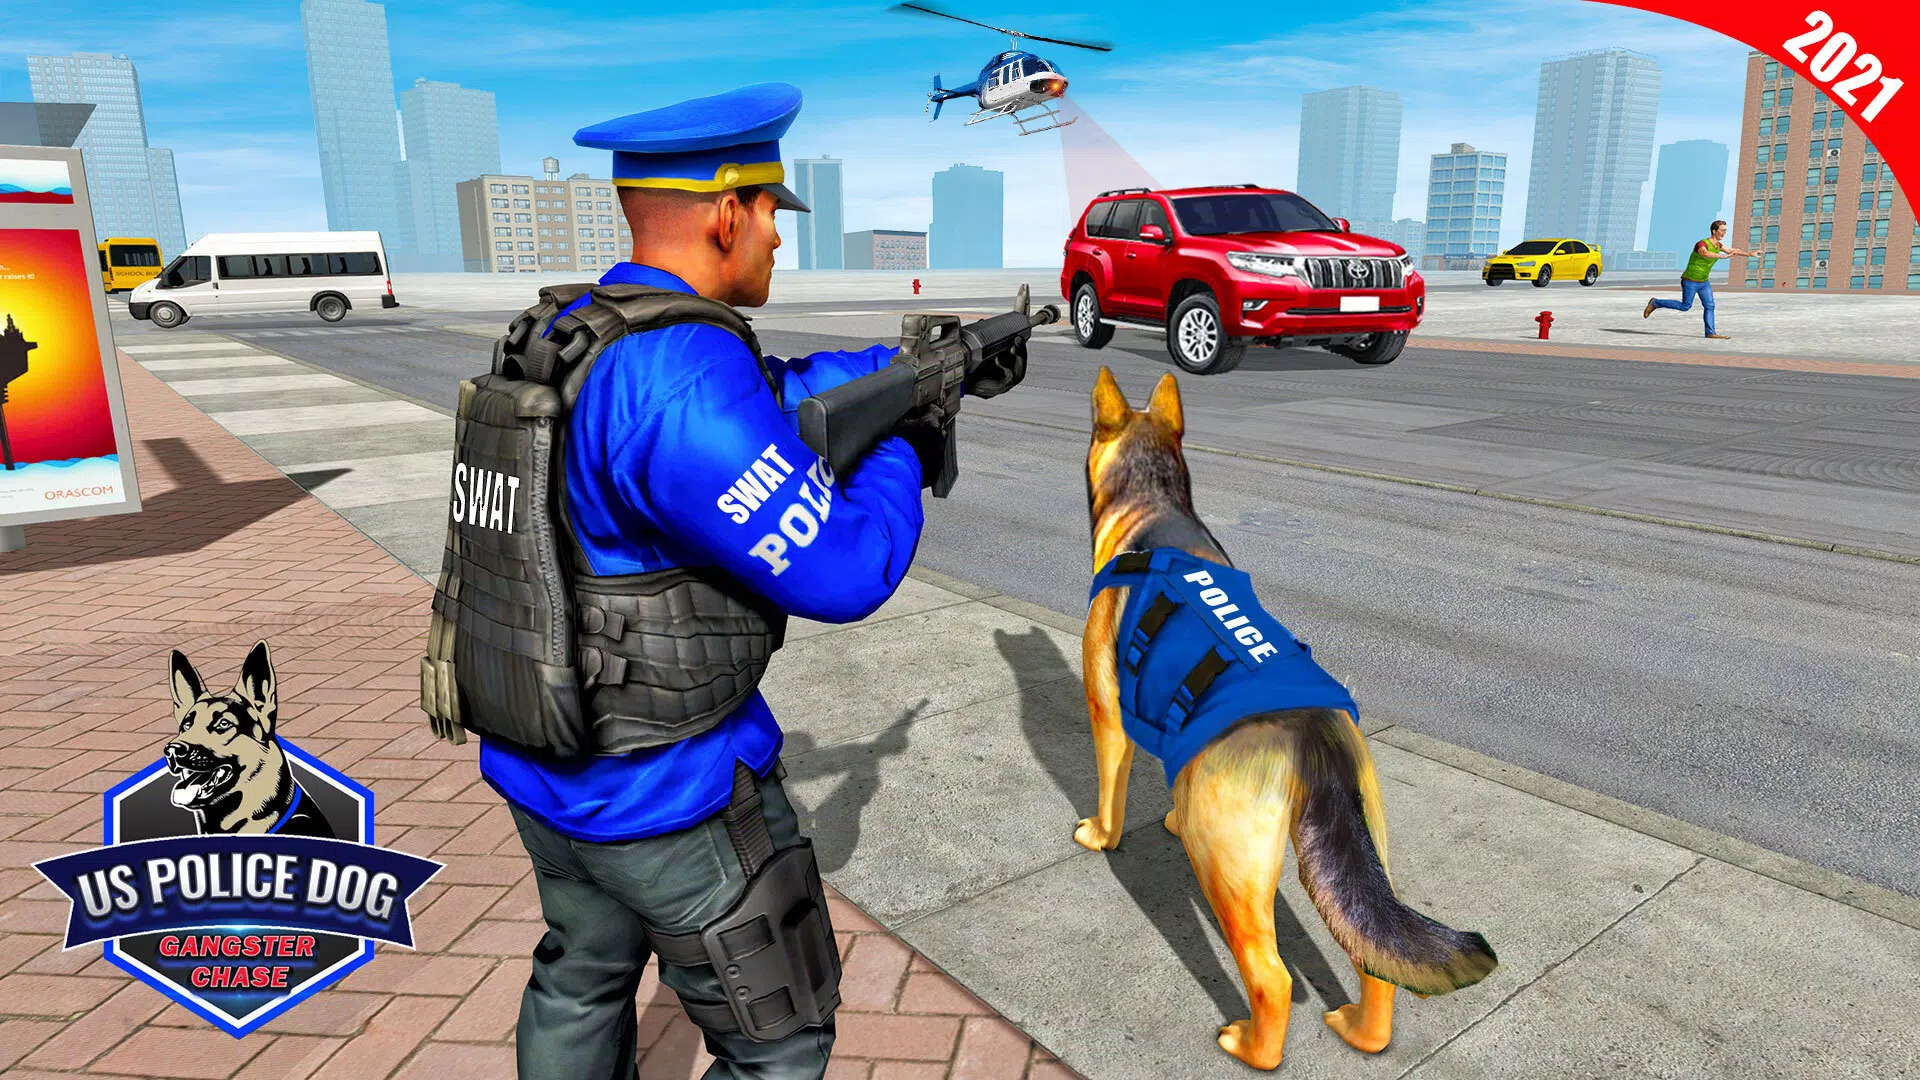 US Police Dog Crime Chase Game for Android - APK Download